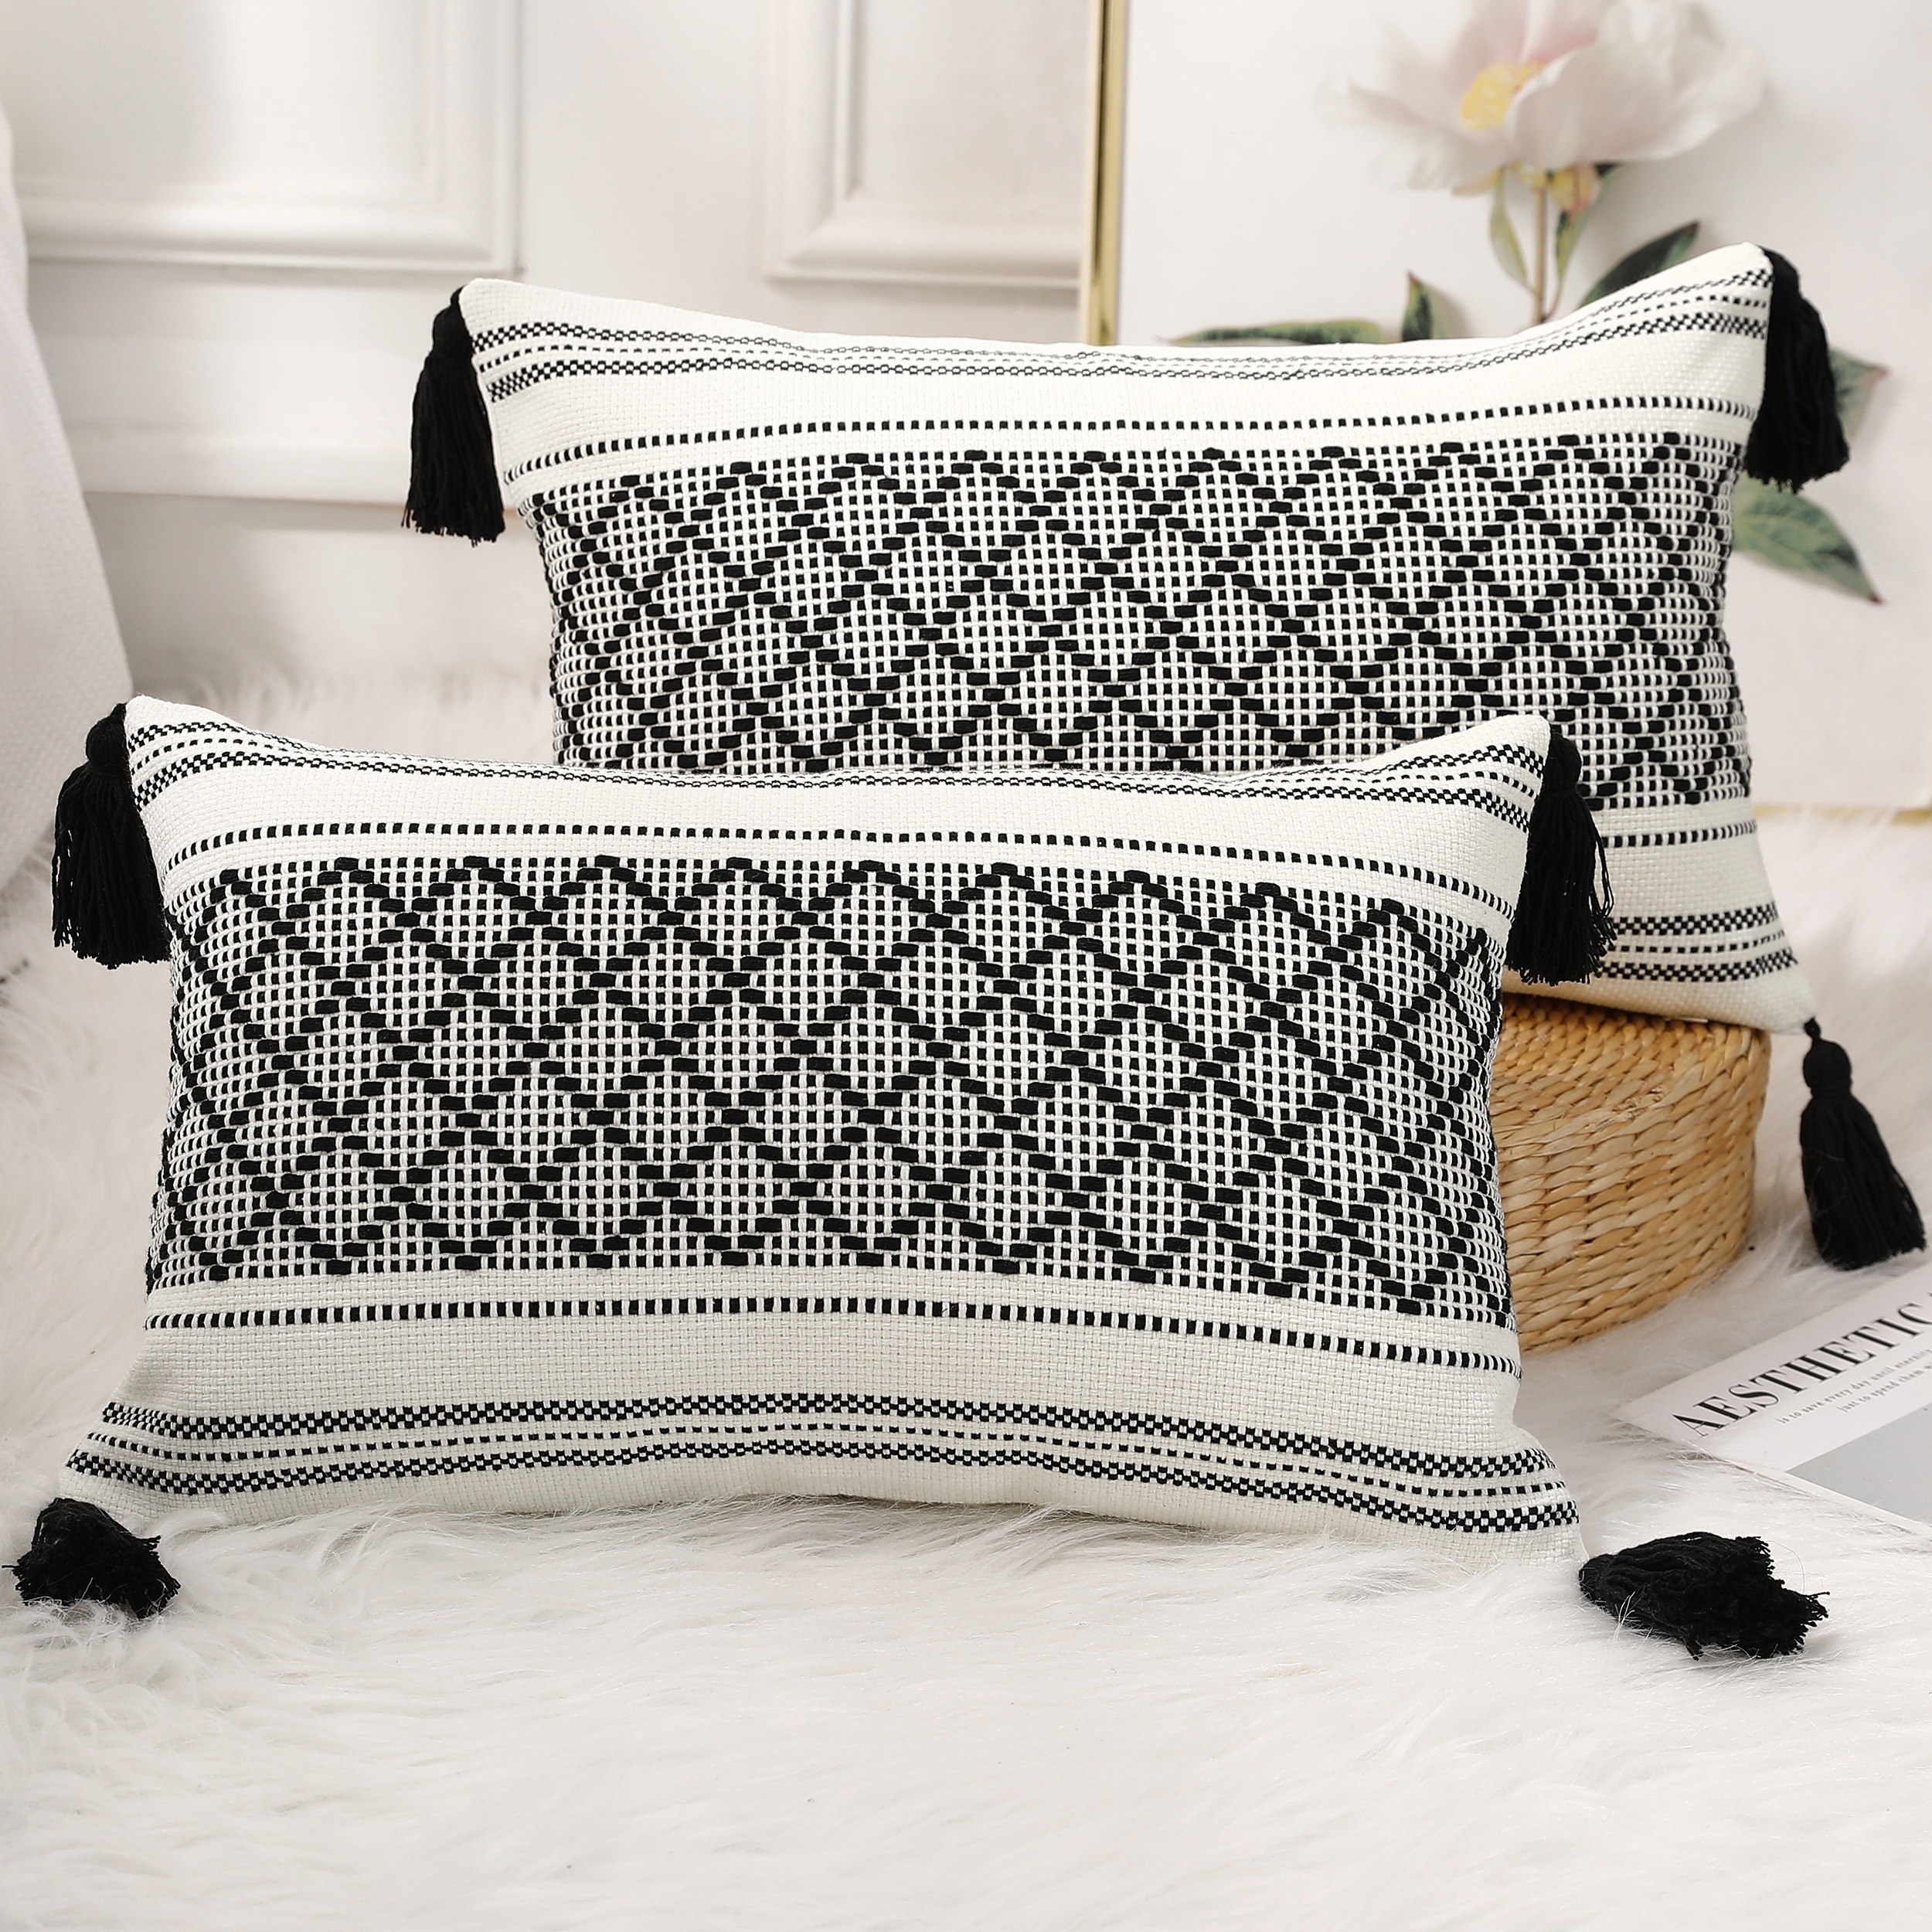 Decorative Boho Lumbar Pillow Covers with Tassels (Navy Blue, 12x20 inch  -Set of 2) / Small Rectangle Cushion Covers for Couch Sofa/Farmhouse Woven